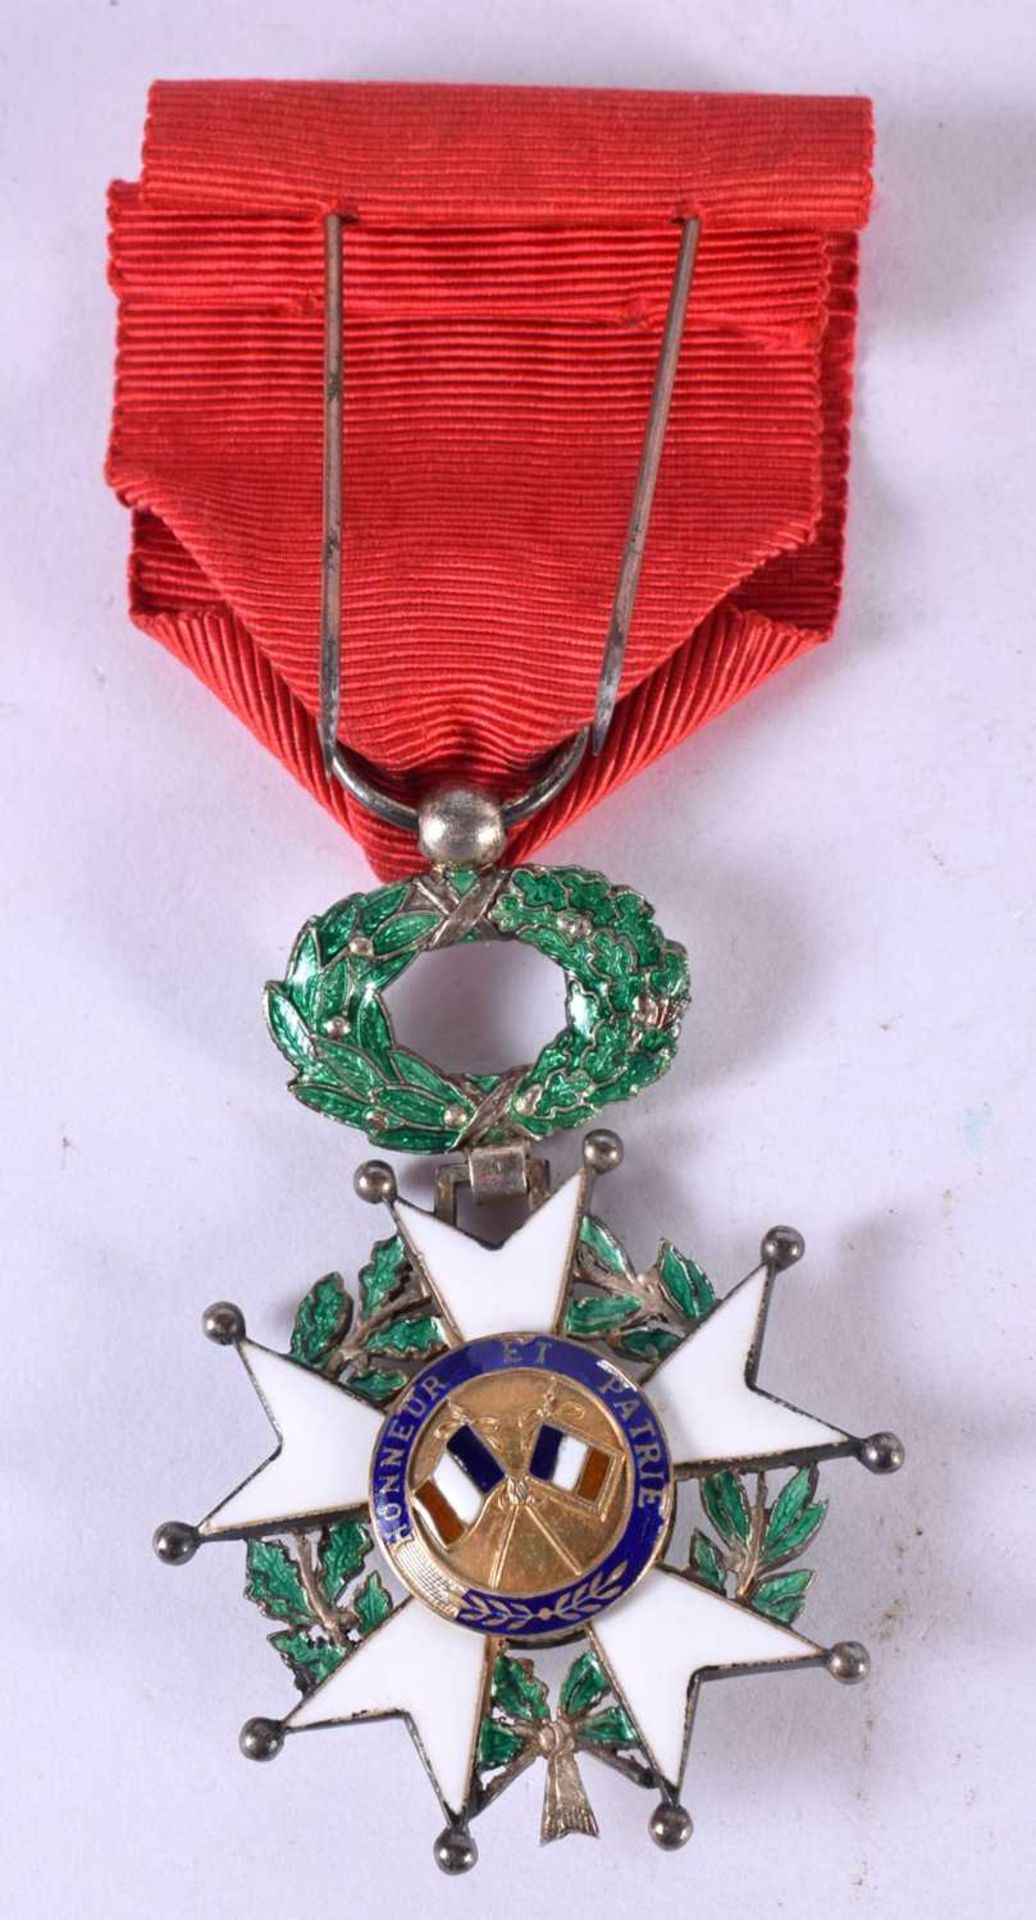 A CASED FRENCH LEGION OF HONOUR MEDAL "1870" WITH RIBBON - Image 3 of 5